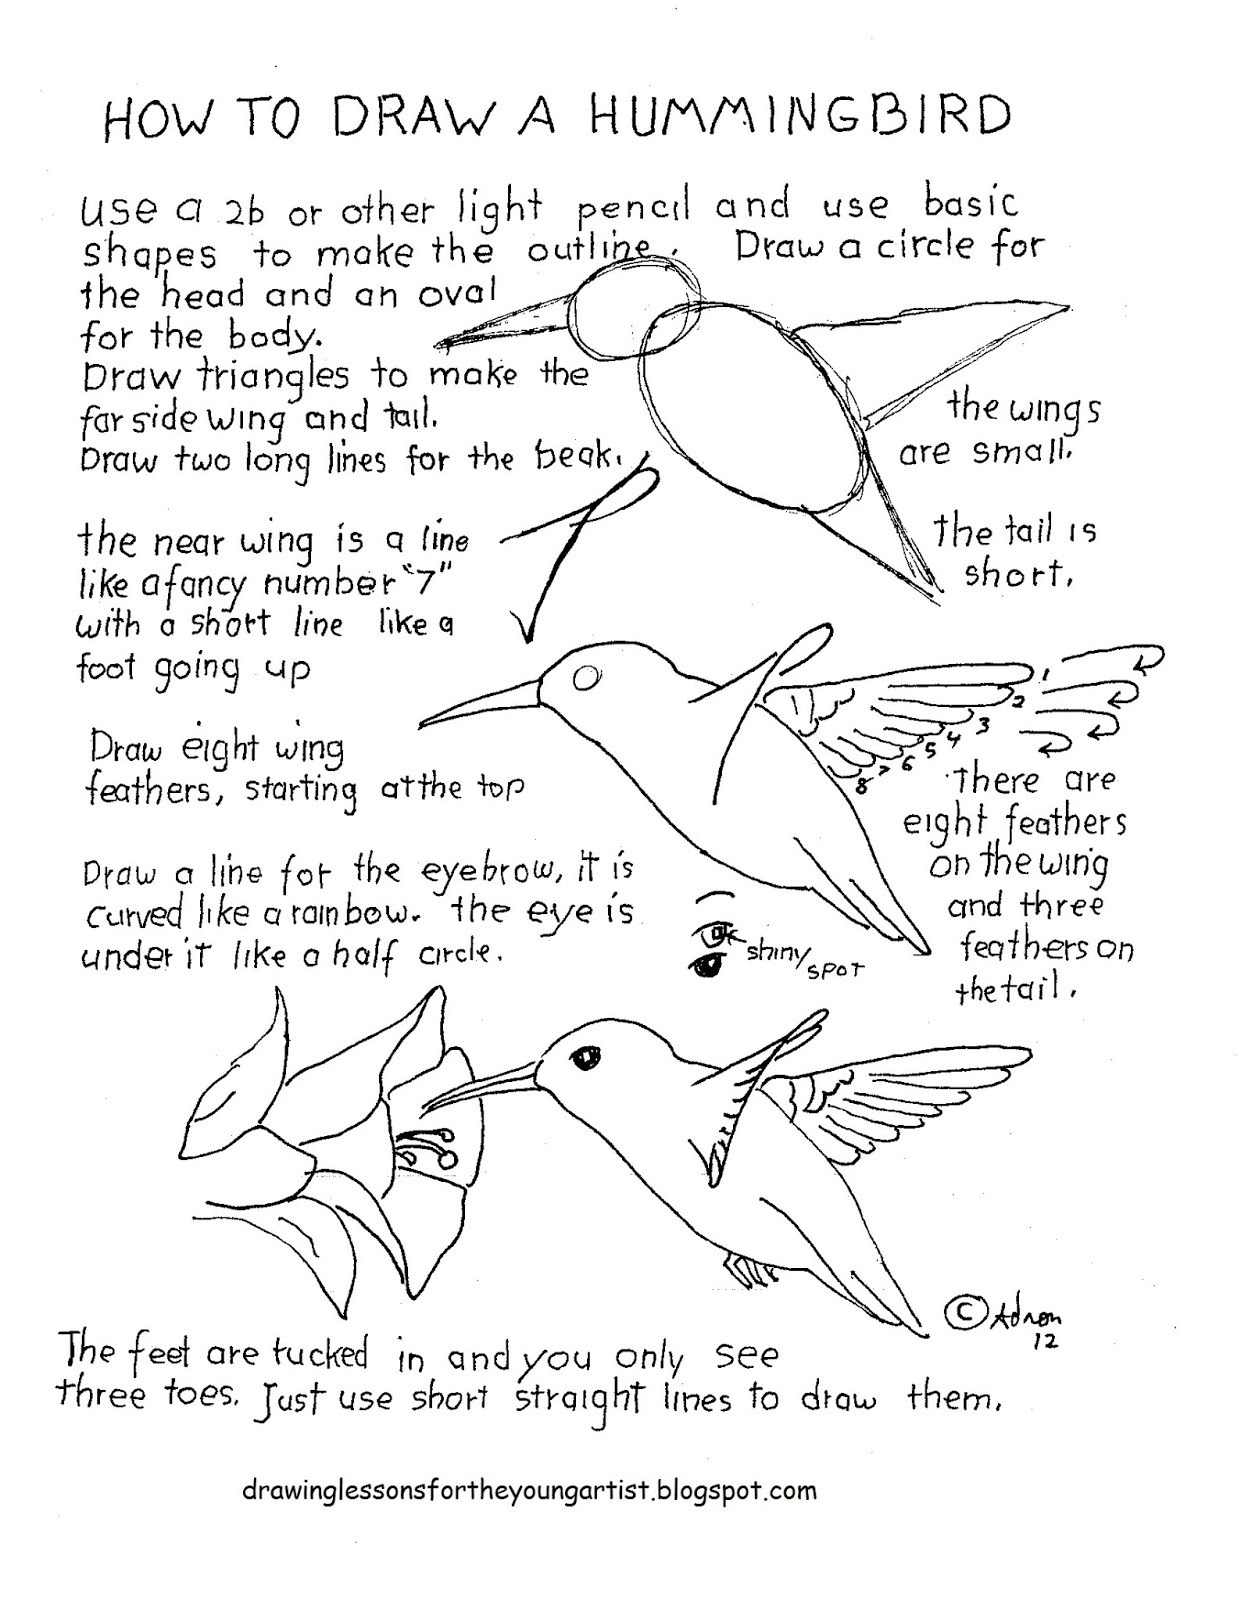 How to Draw Worksheets for The Young Artist: How To Draw A Hummingbird